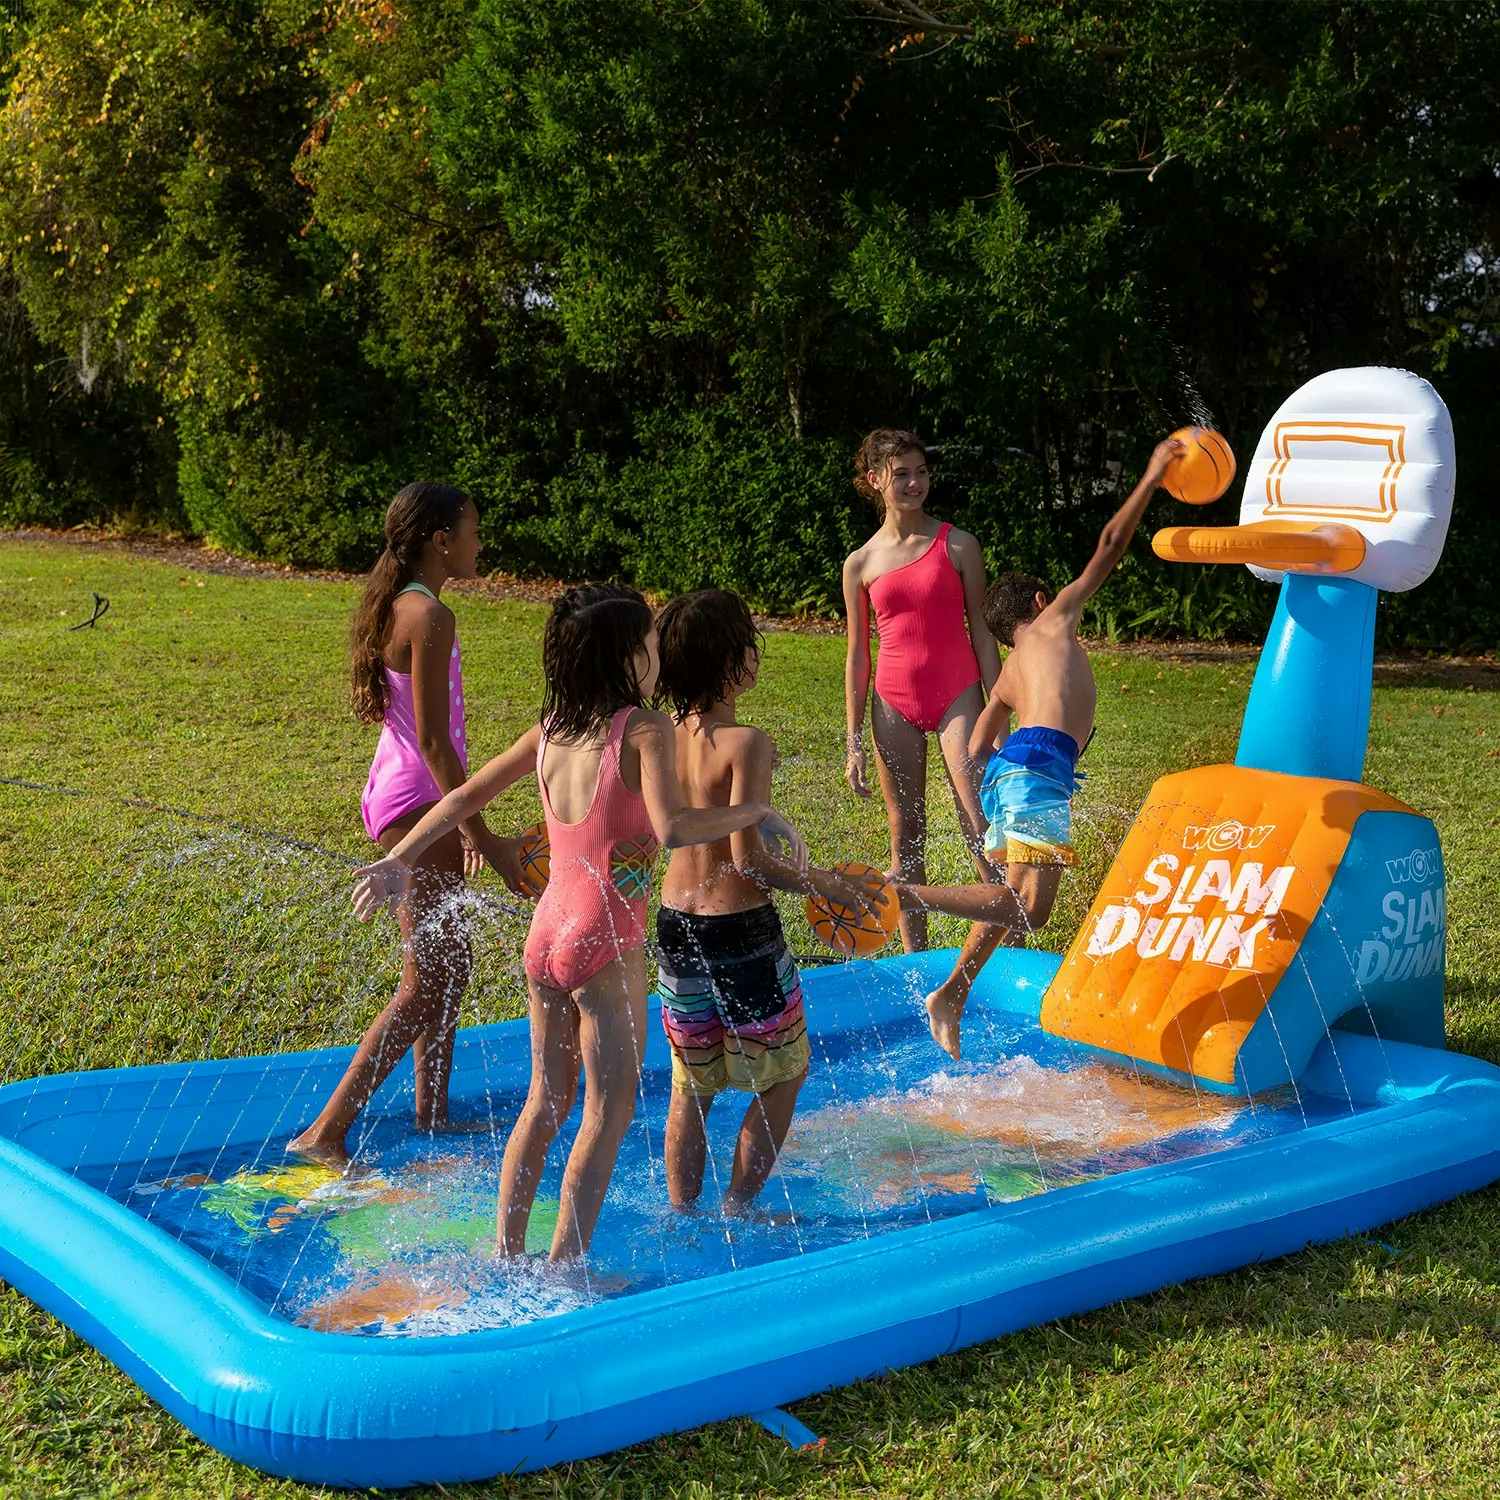 kids playing in an inflatable splash pad with a basketball hoop